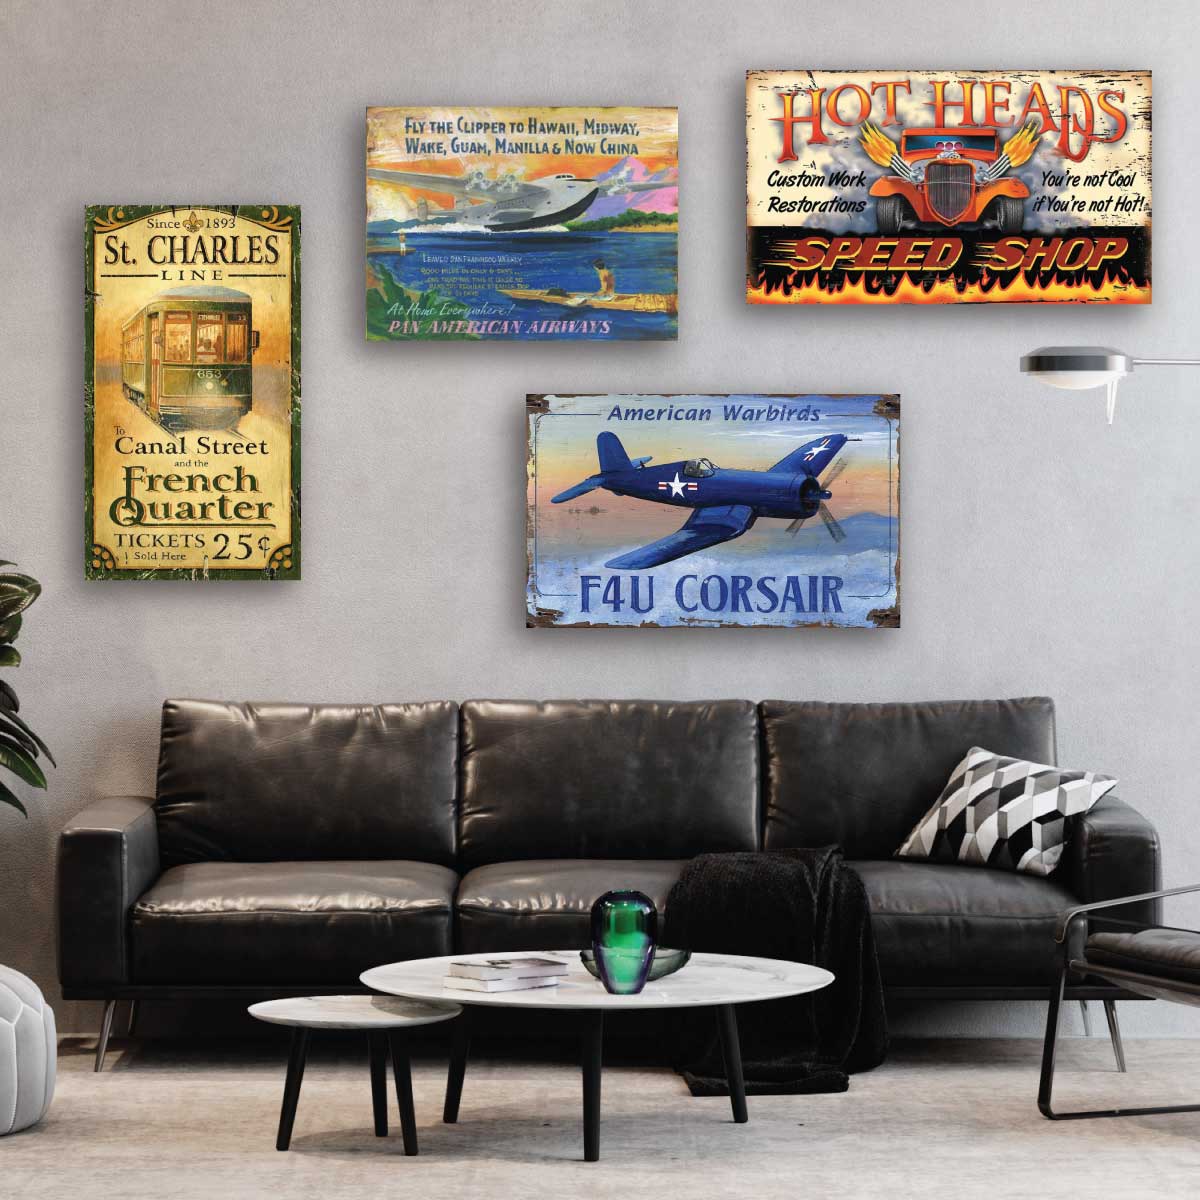 Transportation themed wall art - cable car, Pan Am Clipper, hot rod car, and airplane vintage wood signs